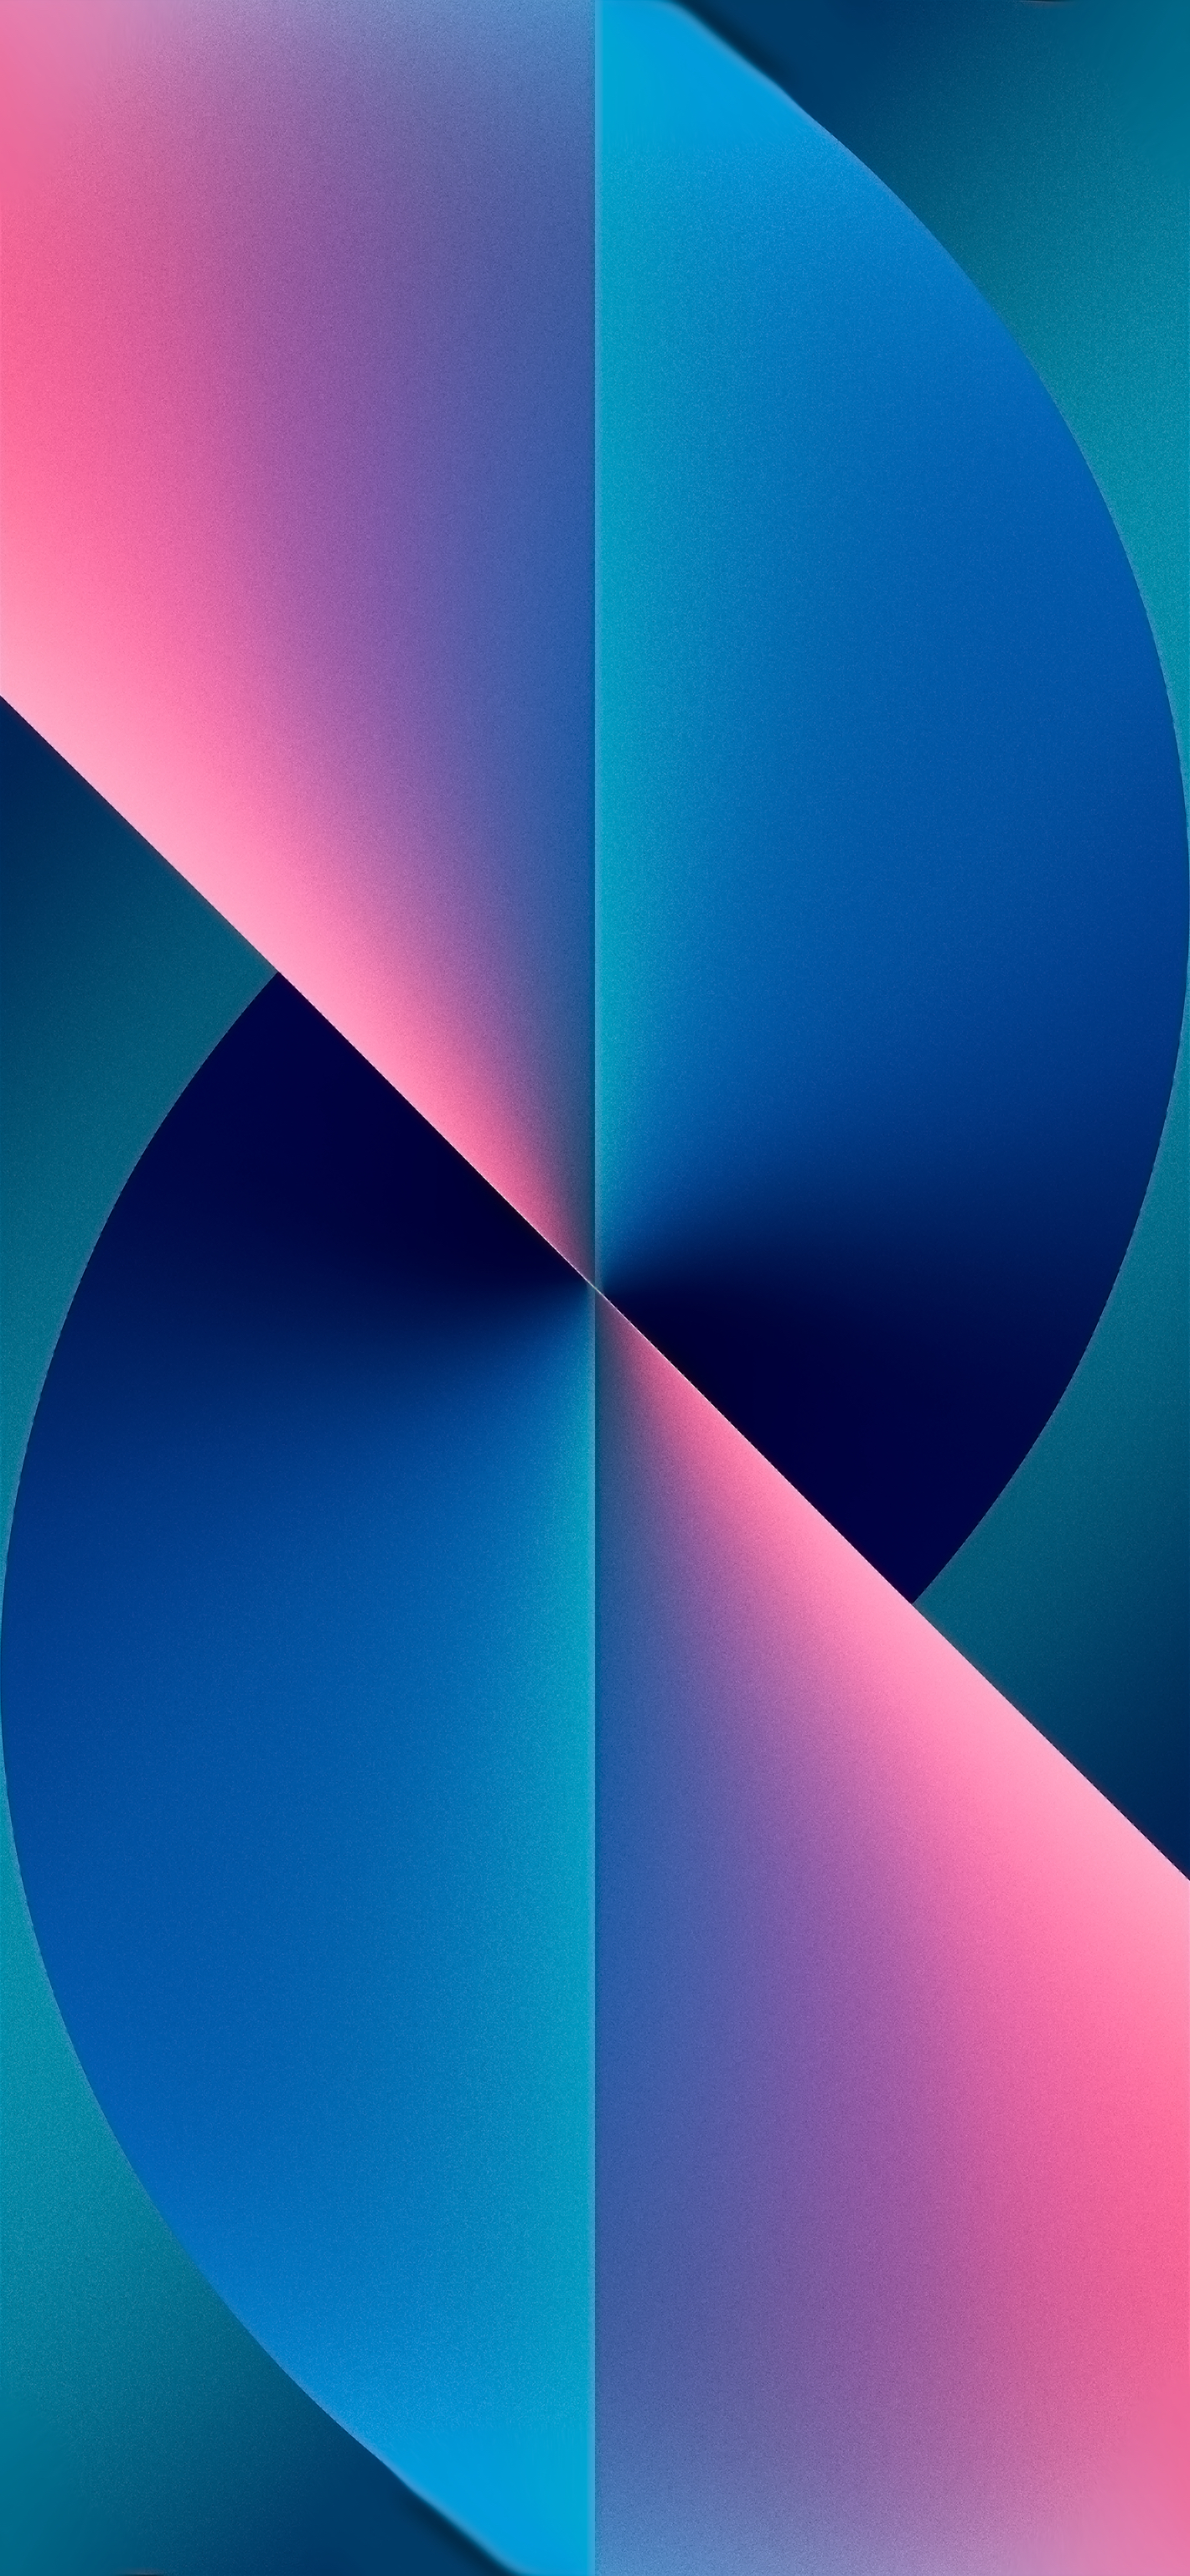 Creative wallpaper designs inspired by iPhone 13 devices